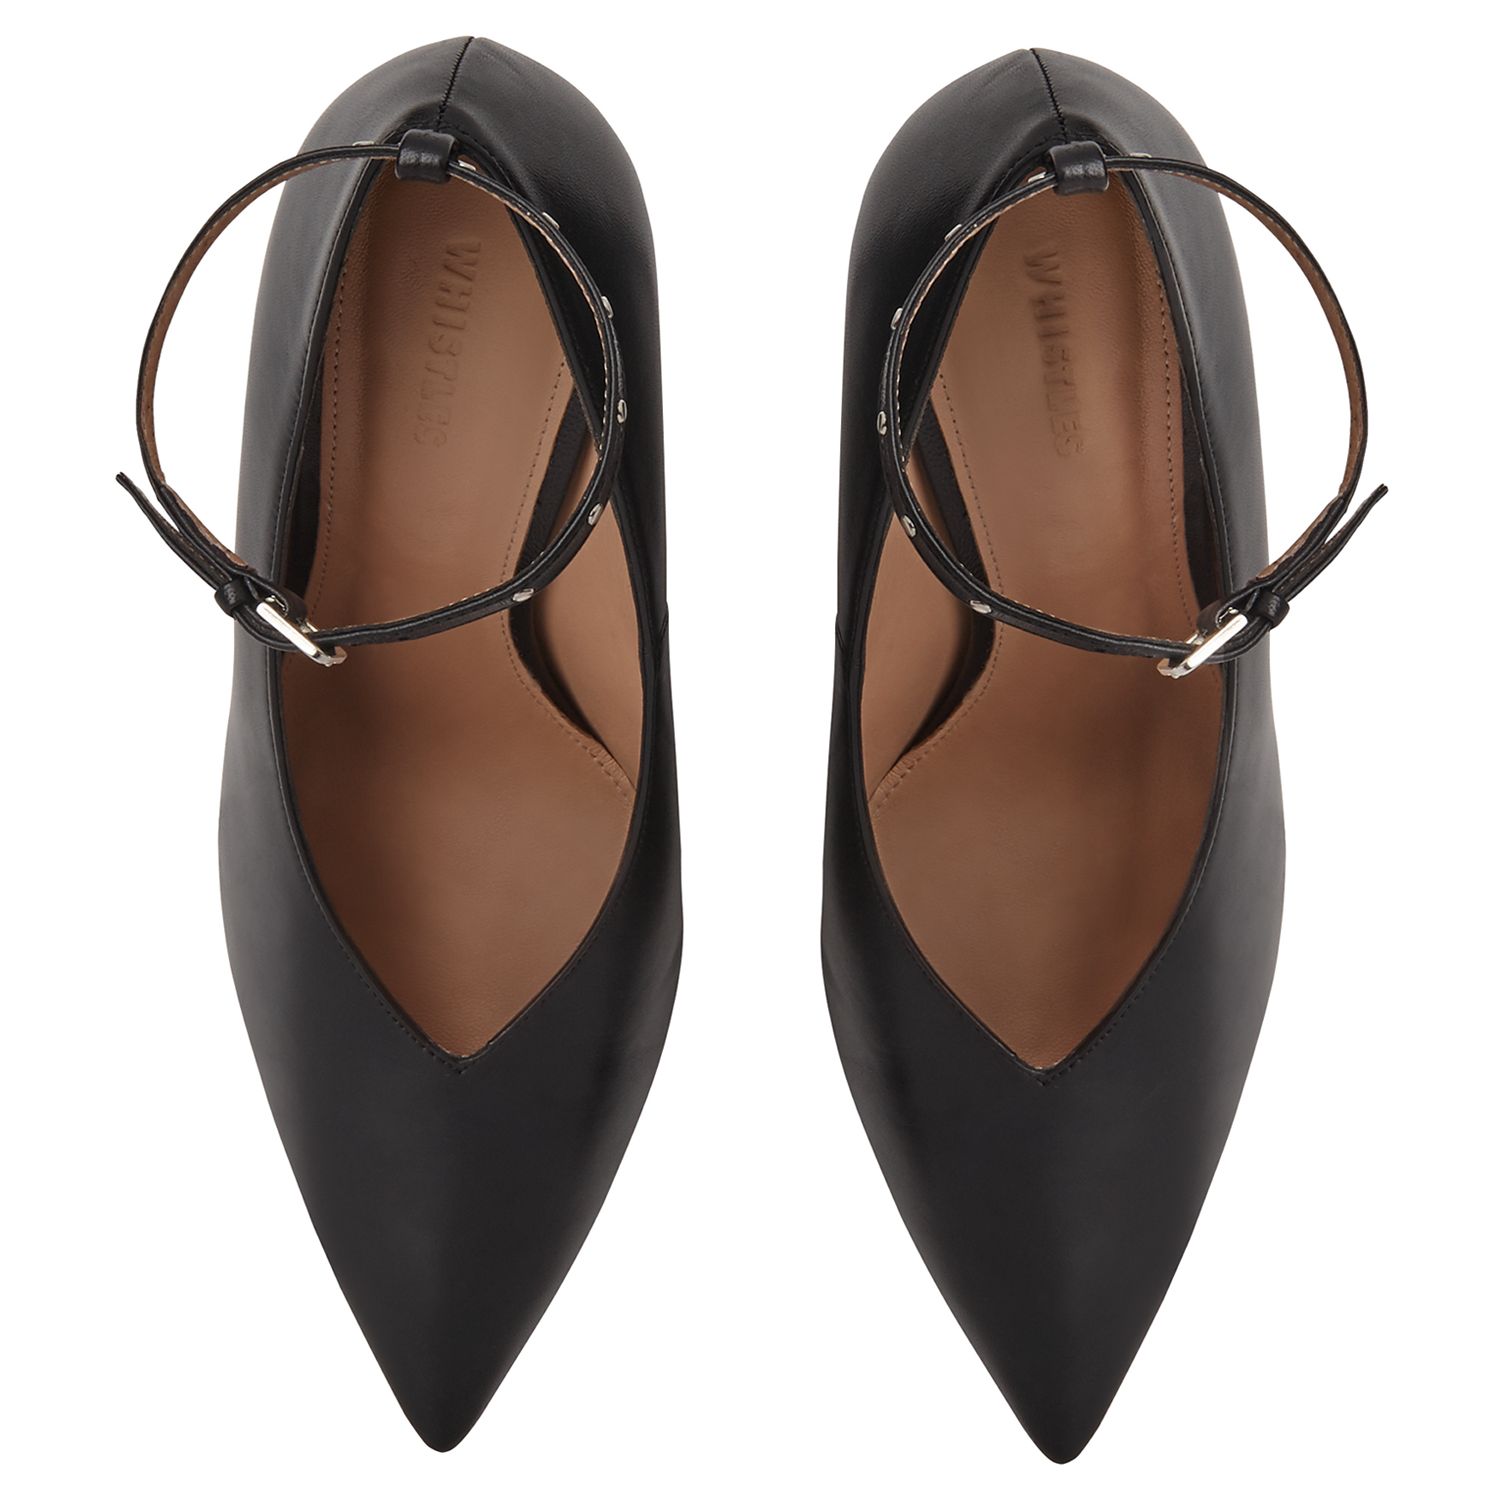 Whistles Compton Pointed Toe Court Shoes, Black Leather